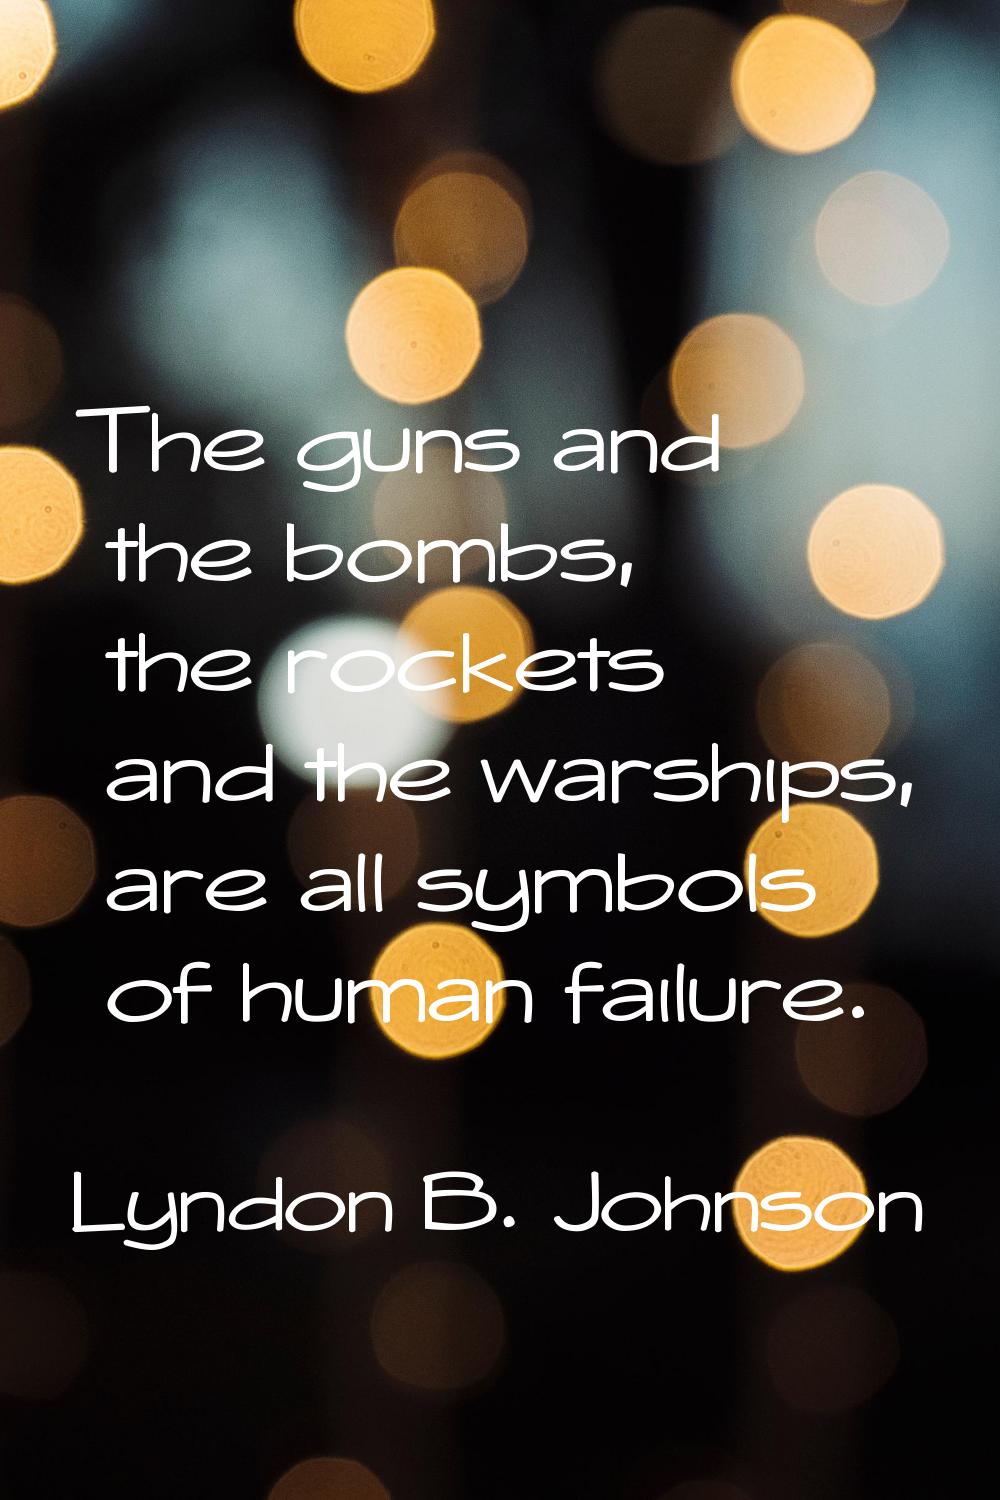 The guns and the bombs, the rockets and the warships, are all symbols of human failure.